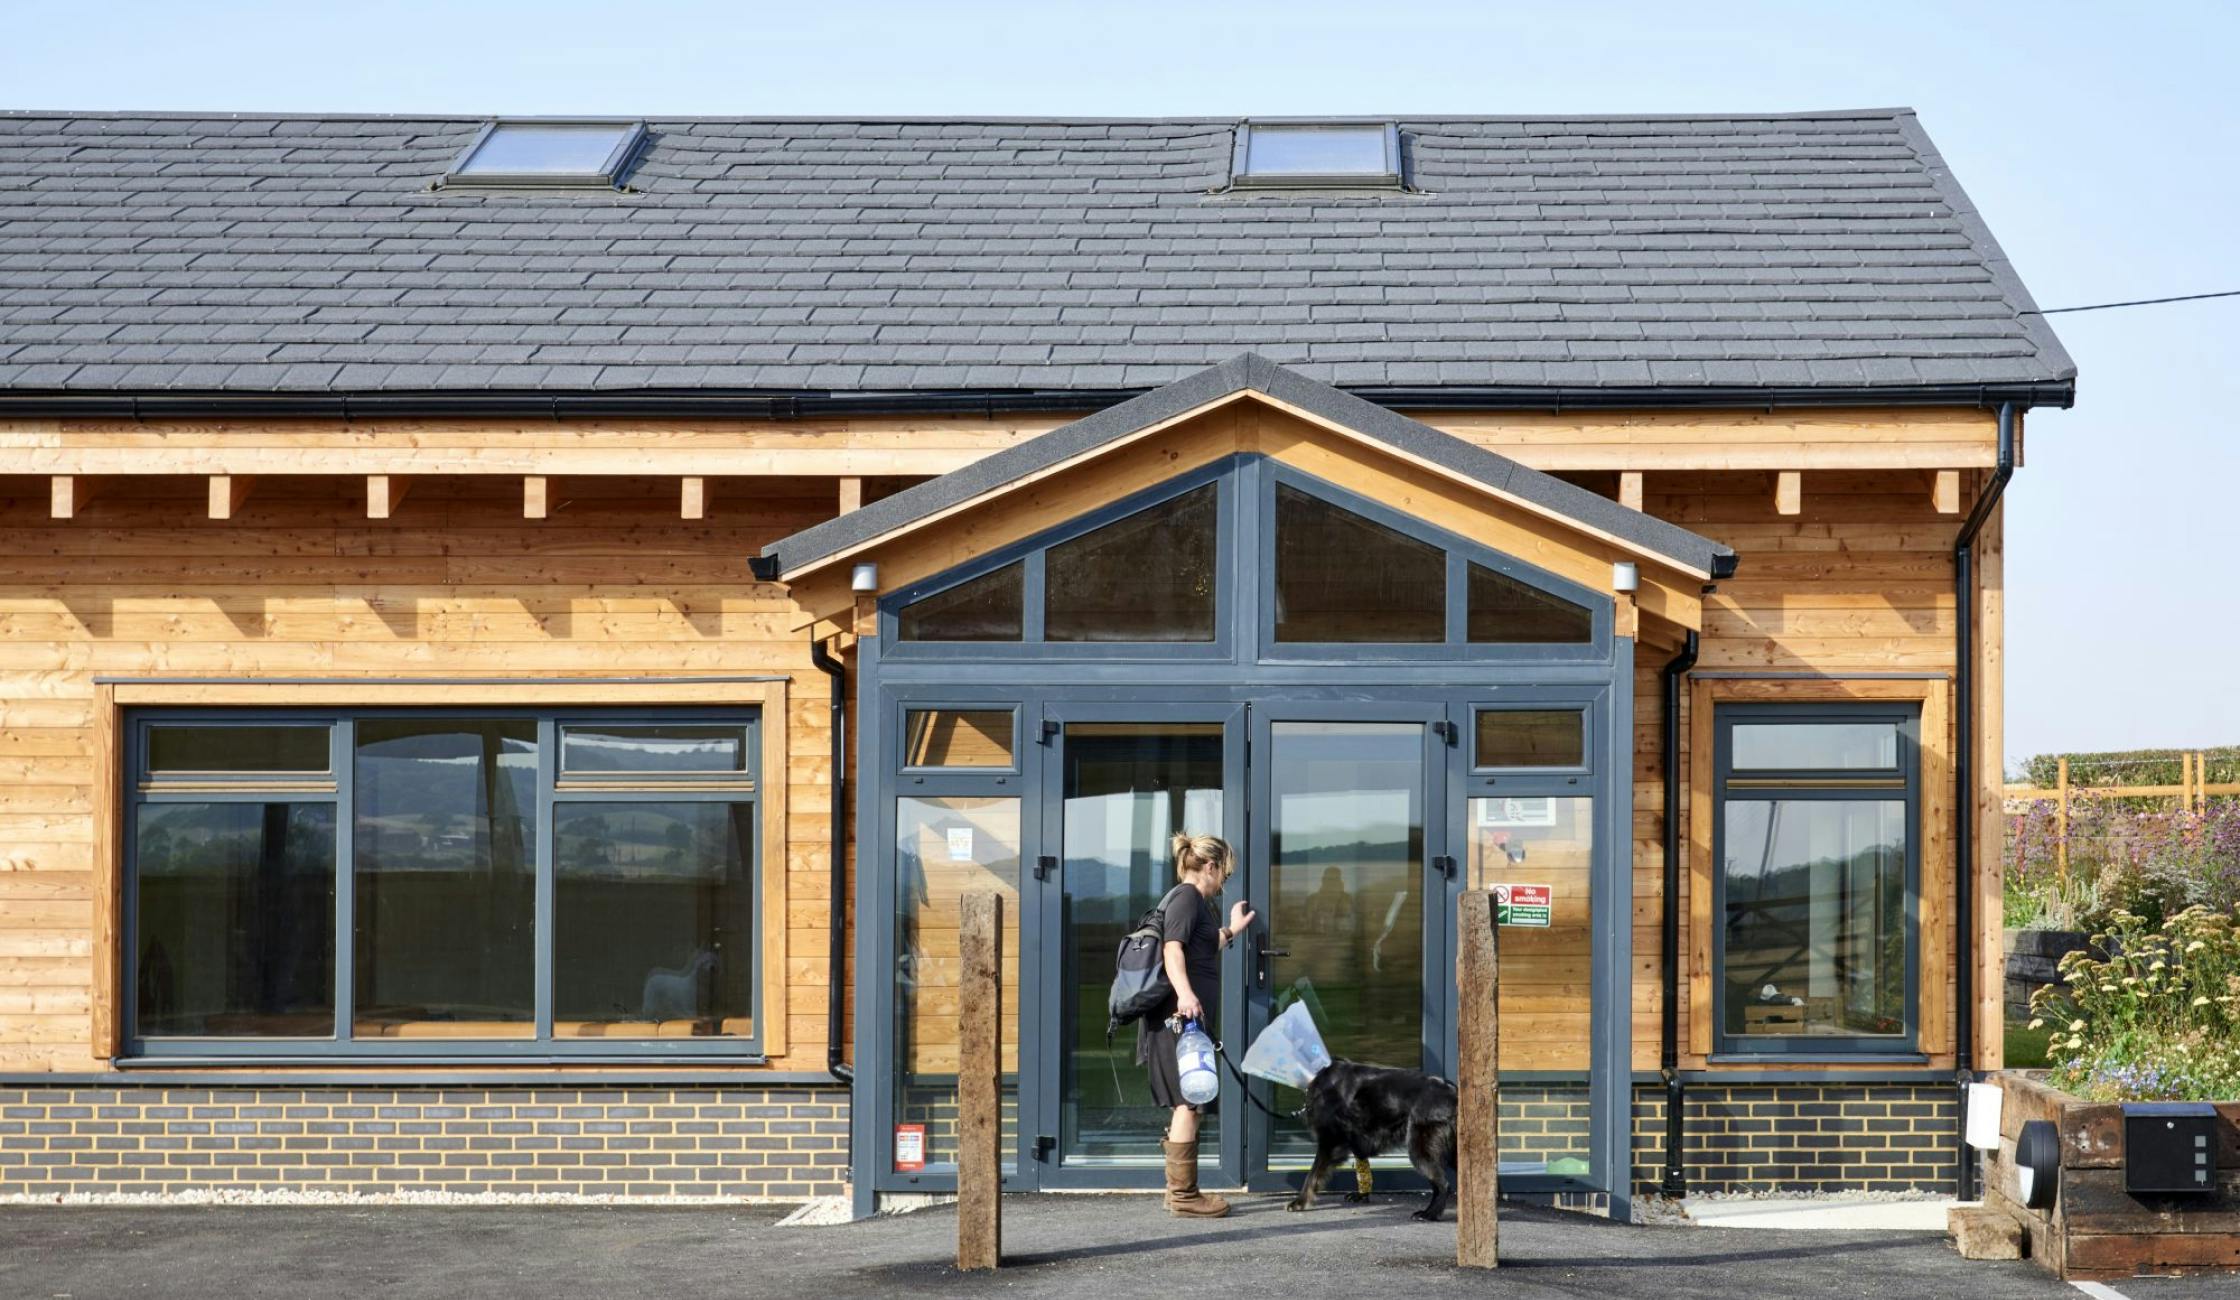 Barn-like commercial building with larch facade